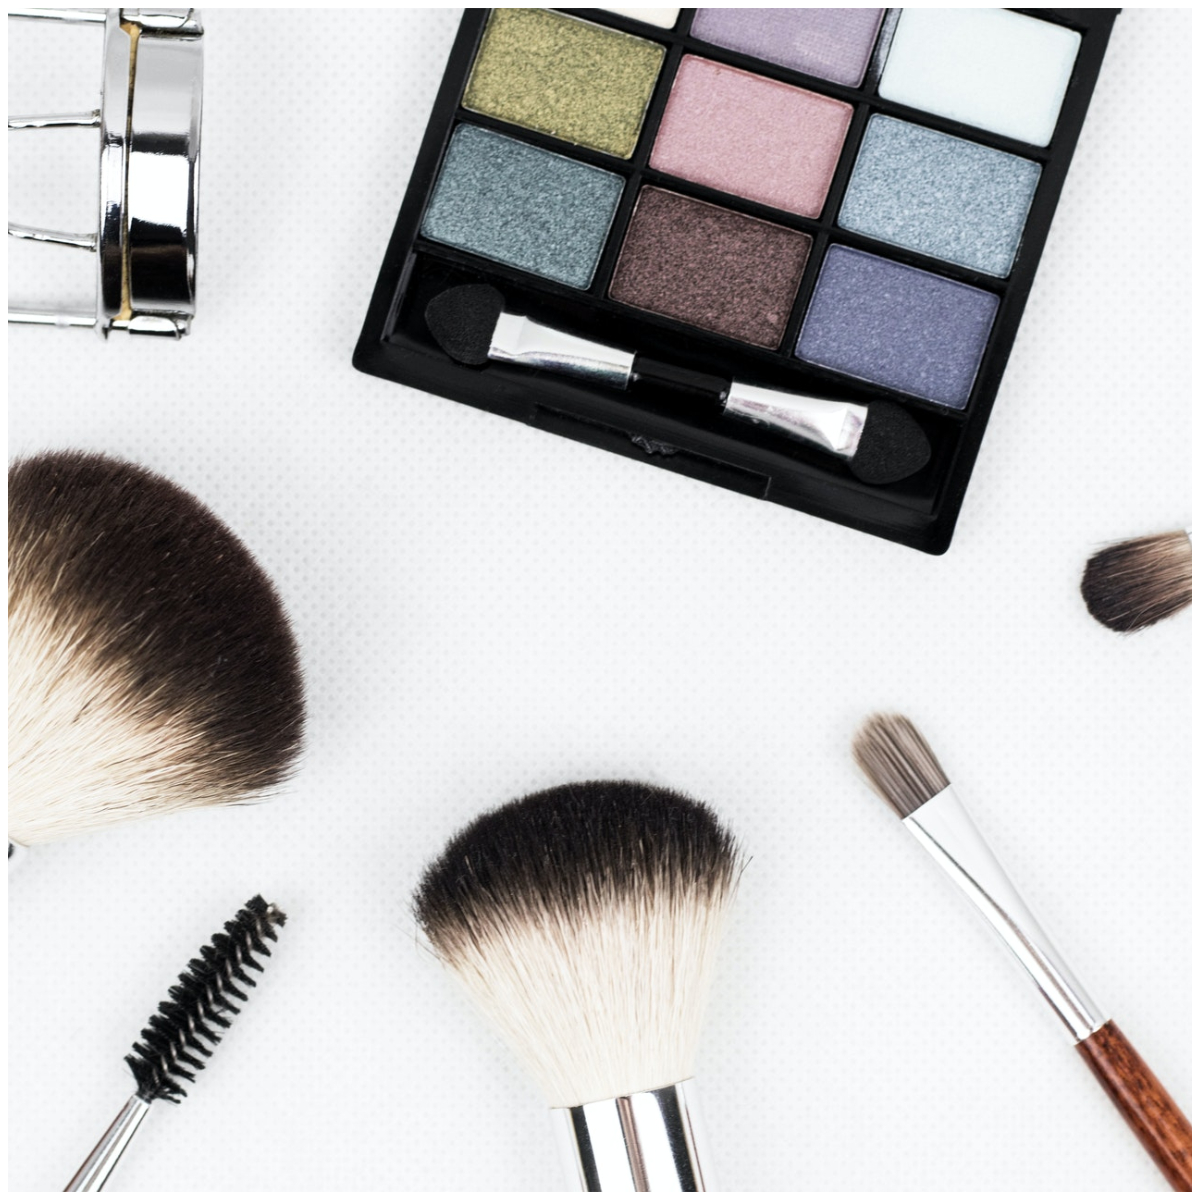 Know 7 important makeup tools every beginner needs to know | PINKVILLA